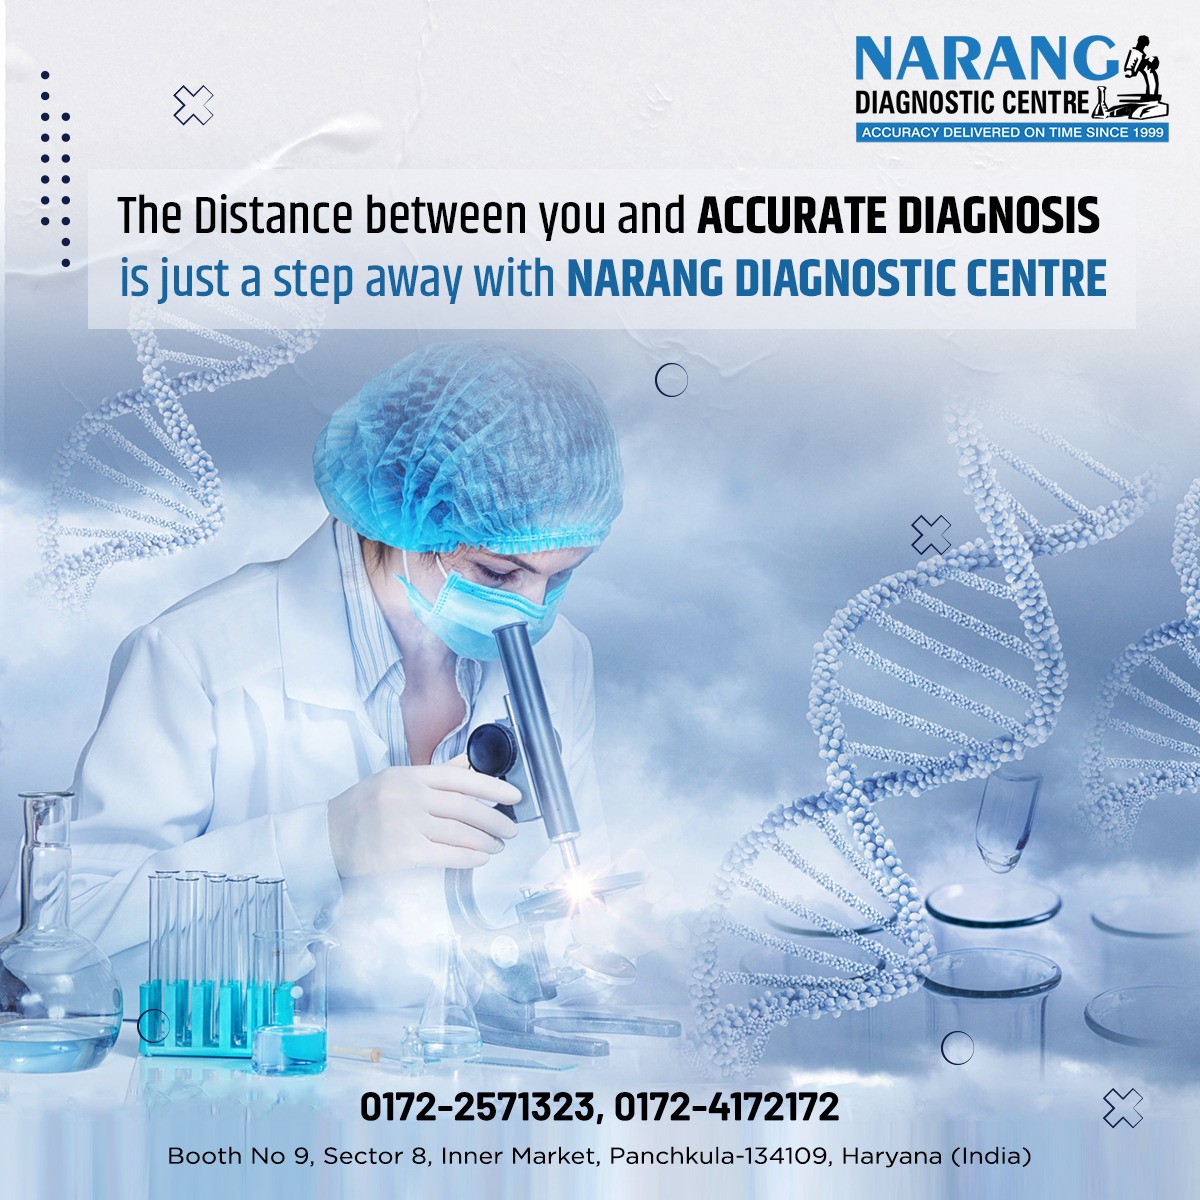 The distance between you and Accurate Diagnosis is just a step away with 𝗡𝗮𝗿𝗮𝗻𝗴 𝗗𝗶𝗮𝗴𝗻𝗼𝘀𝘁𝗶𝗰 𝗖𝗲𝗻𝘁𝗿𝗲.

Book your Health Check-up - 0172-2571323 or 0172-4172172 

#Qualitydiagnosis #Healthcheckup #Healthpackage #Diagnosticcentre #Trusteddiagnosticcentre